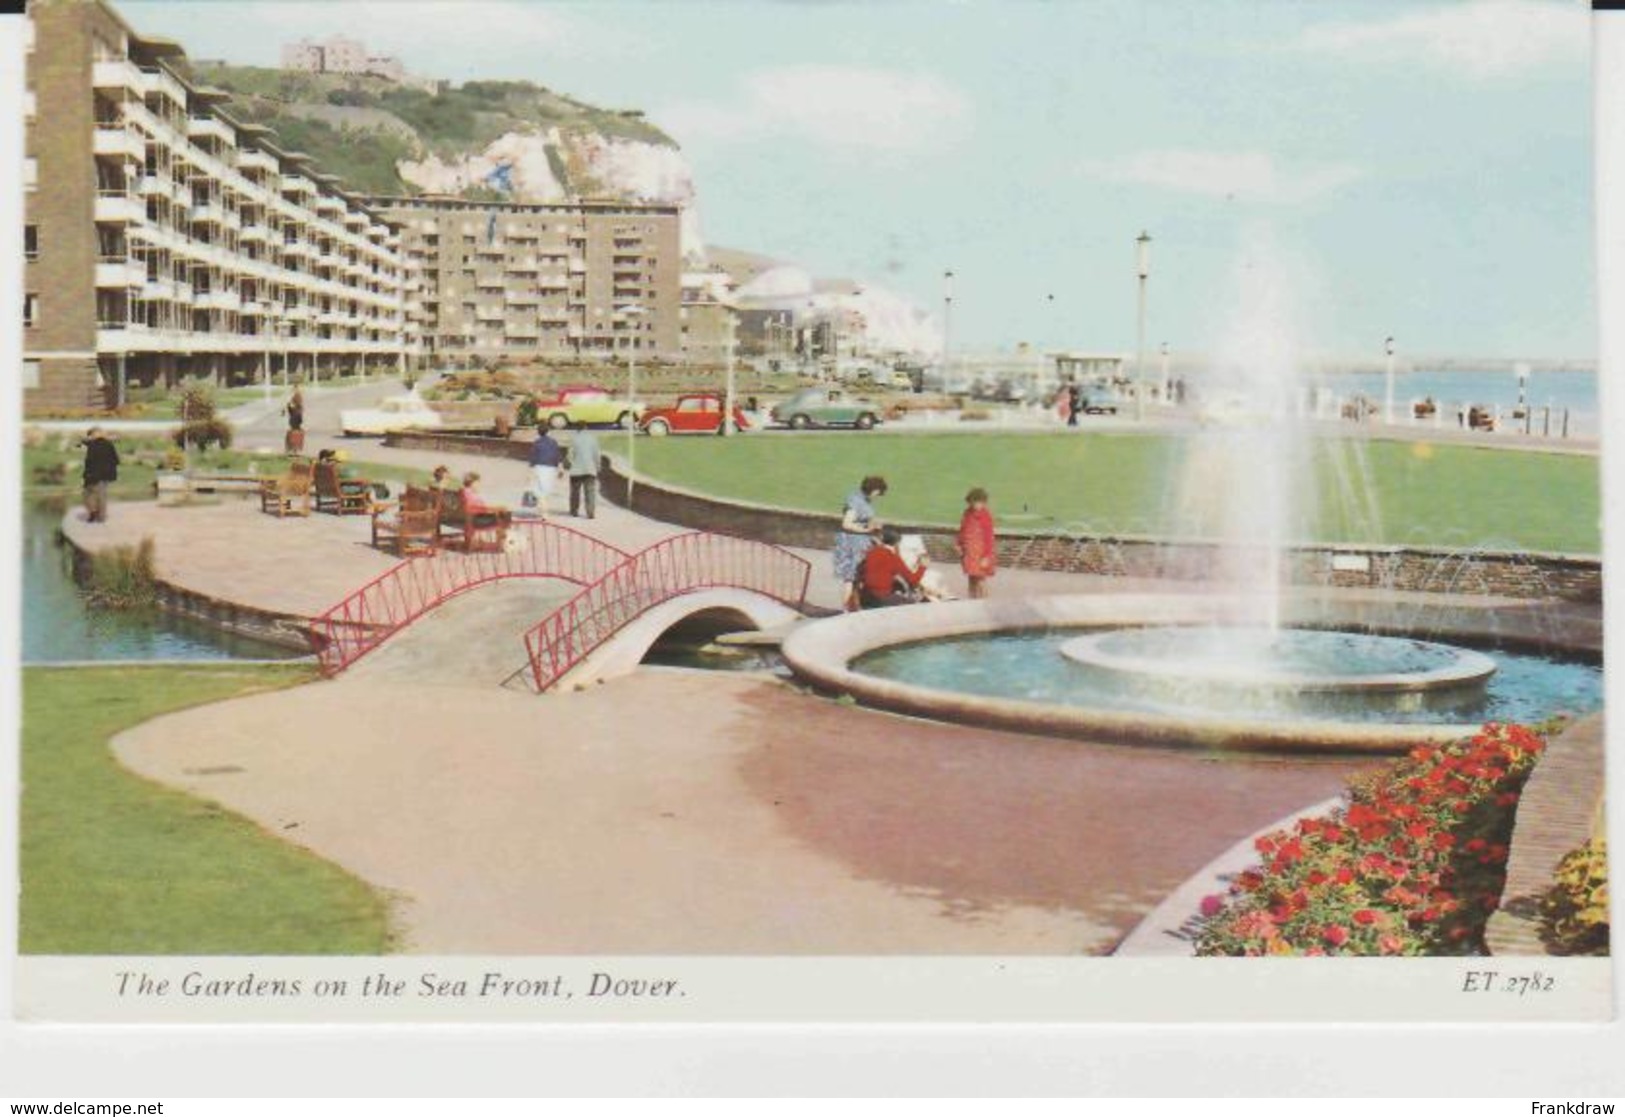 Postcard - The Gardens On The Sea Front, Dover - Unused Very Good - Unclassified